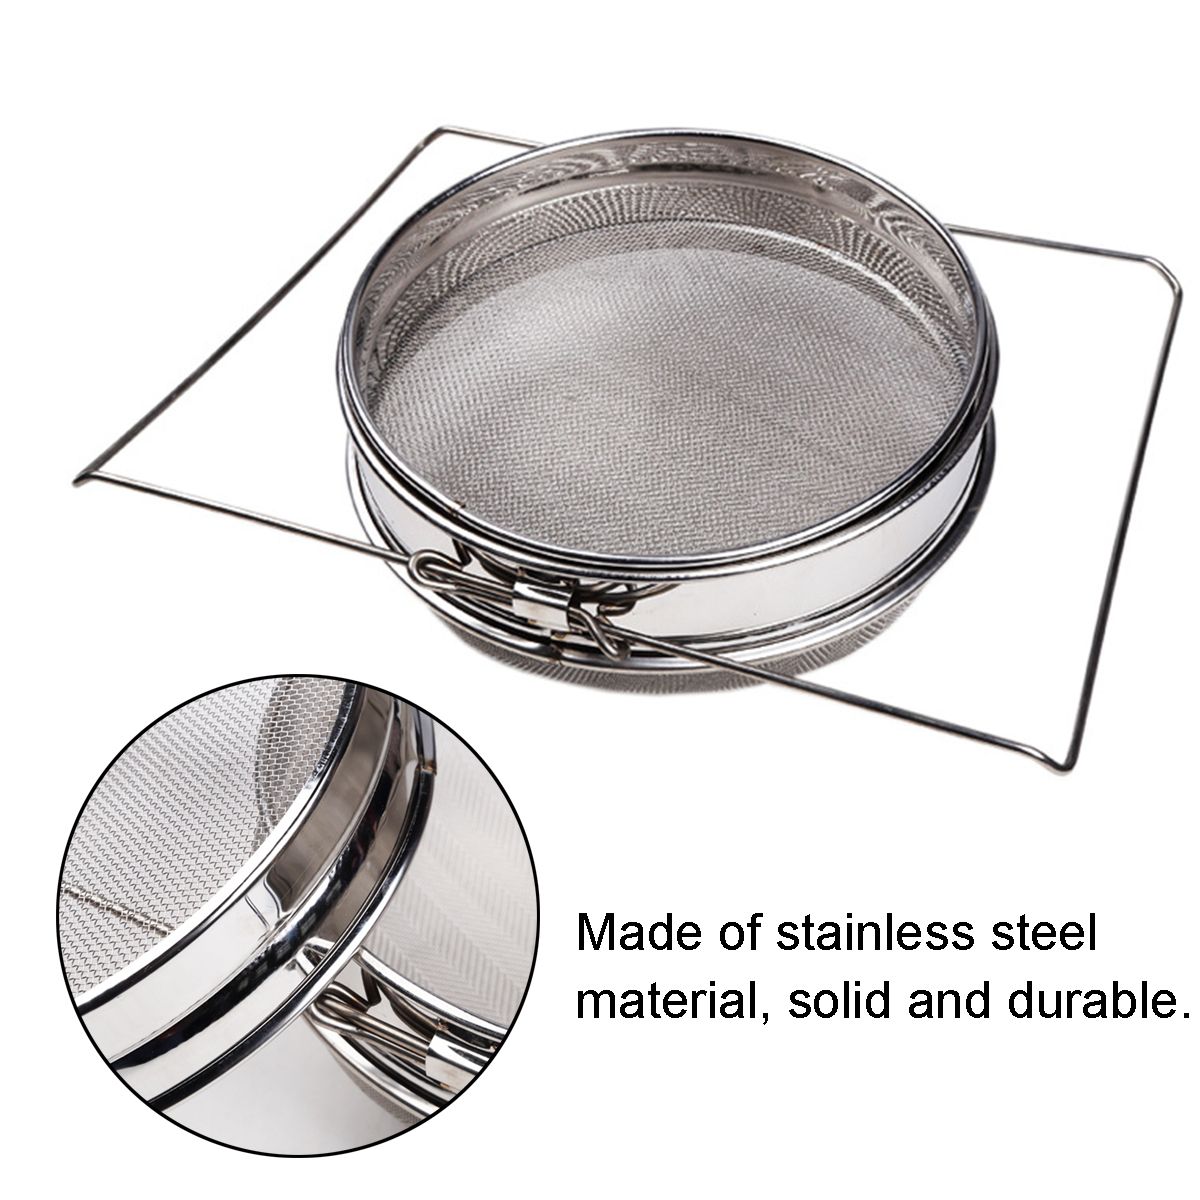 30-Mesh-Double-Layer-Stainless-Steel-Honey-Filter-1648696